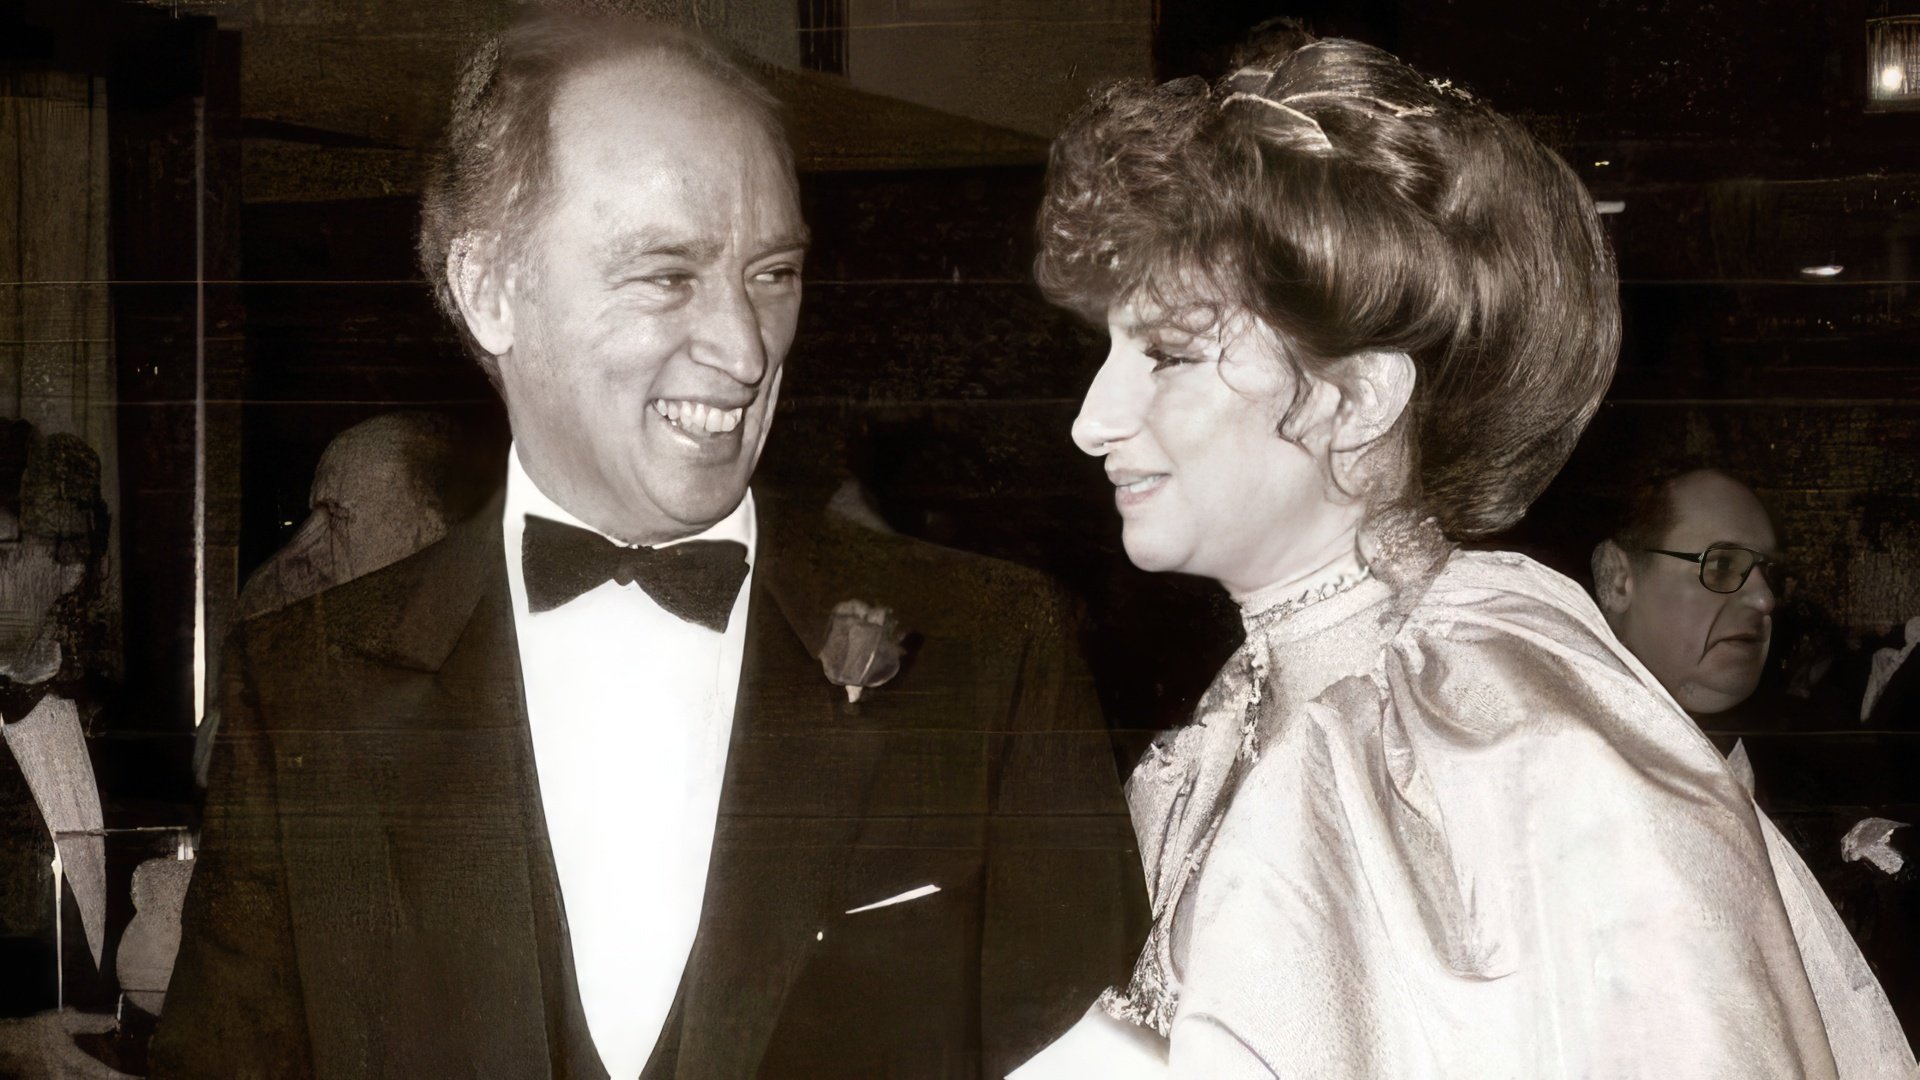 Canadian politician Pierre Trudeau asked Barbra Streisand to marry him